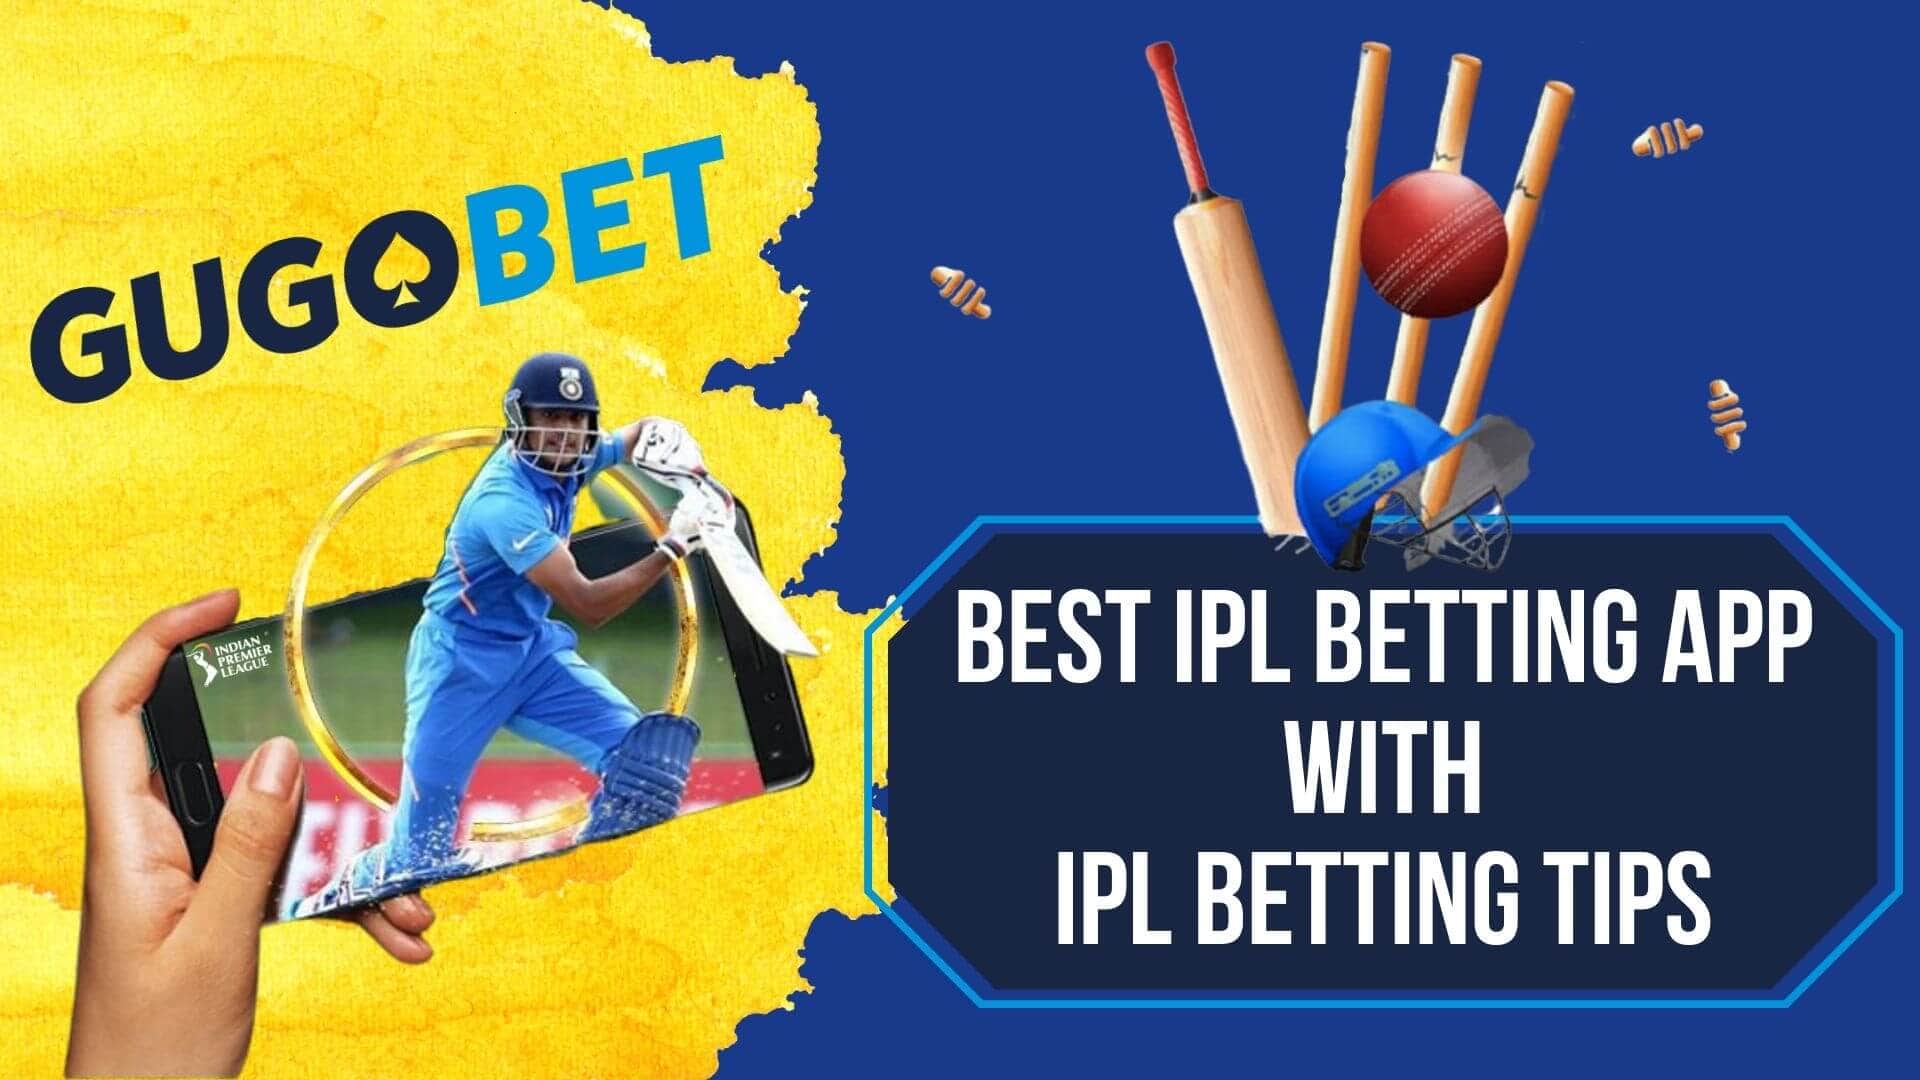 Take Advantage Of IPL betting app download - Read These 99 Tips